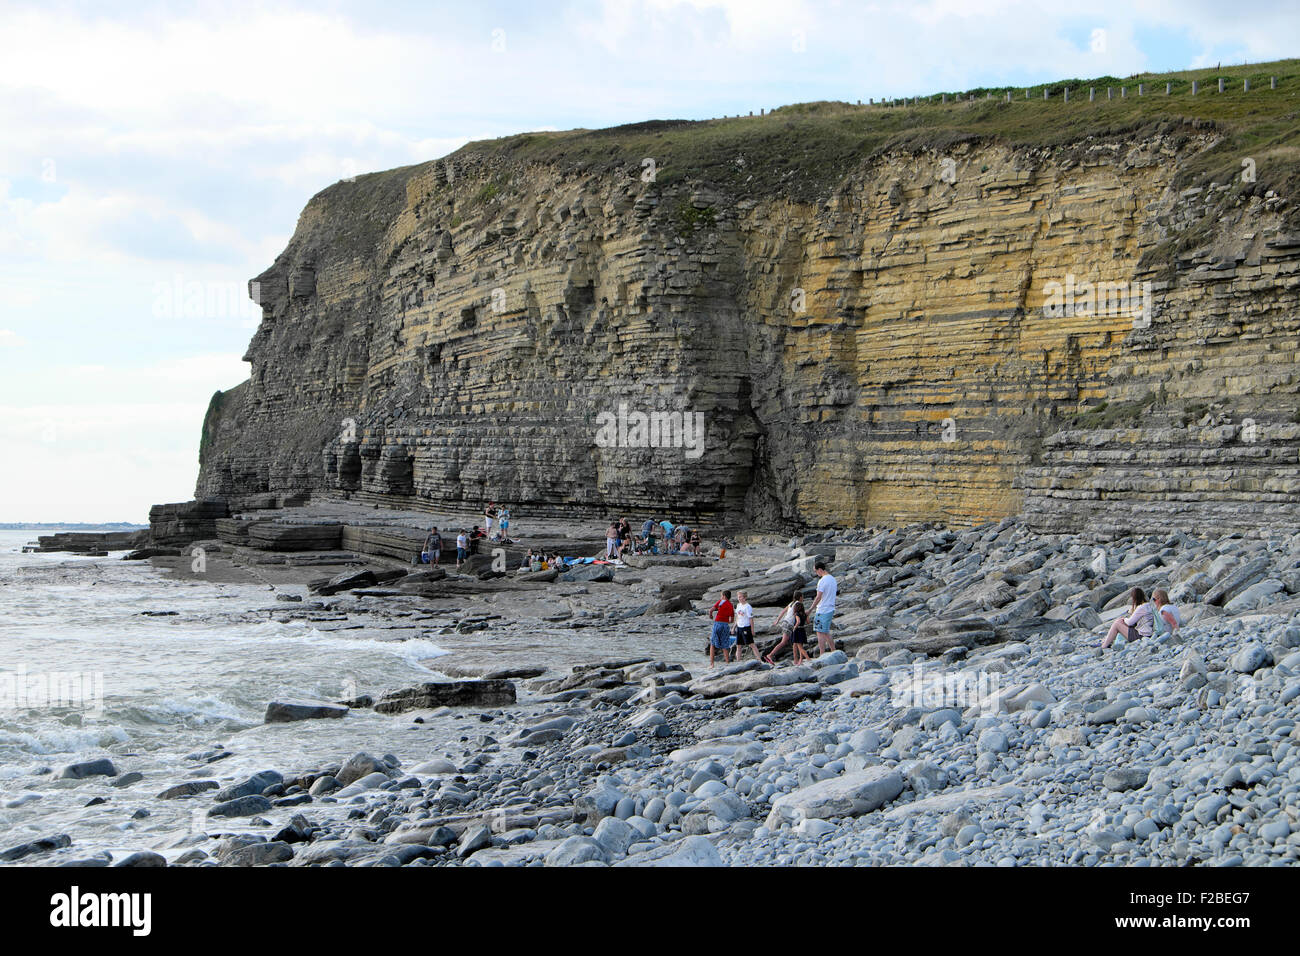 People on the stony beach at Dunraven Bay Wales UK  KATHY DEWITT Stock Photo